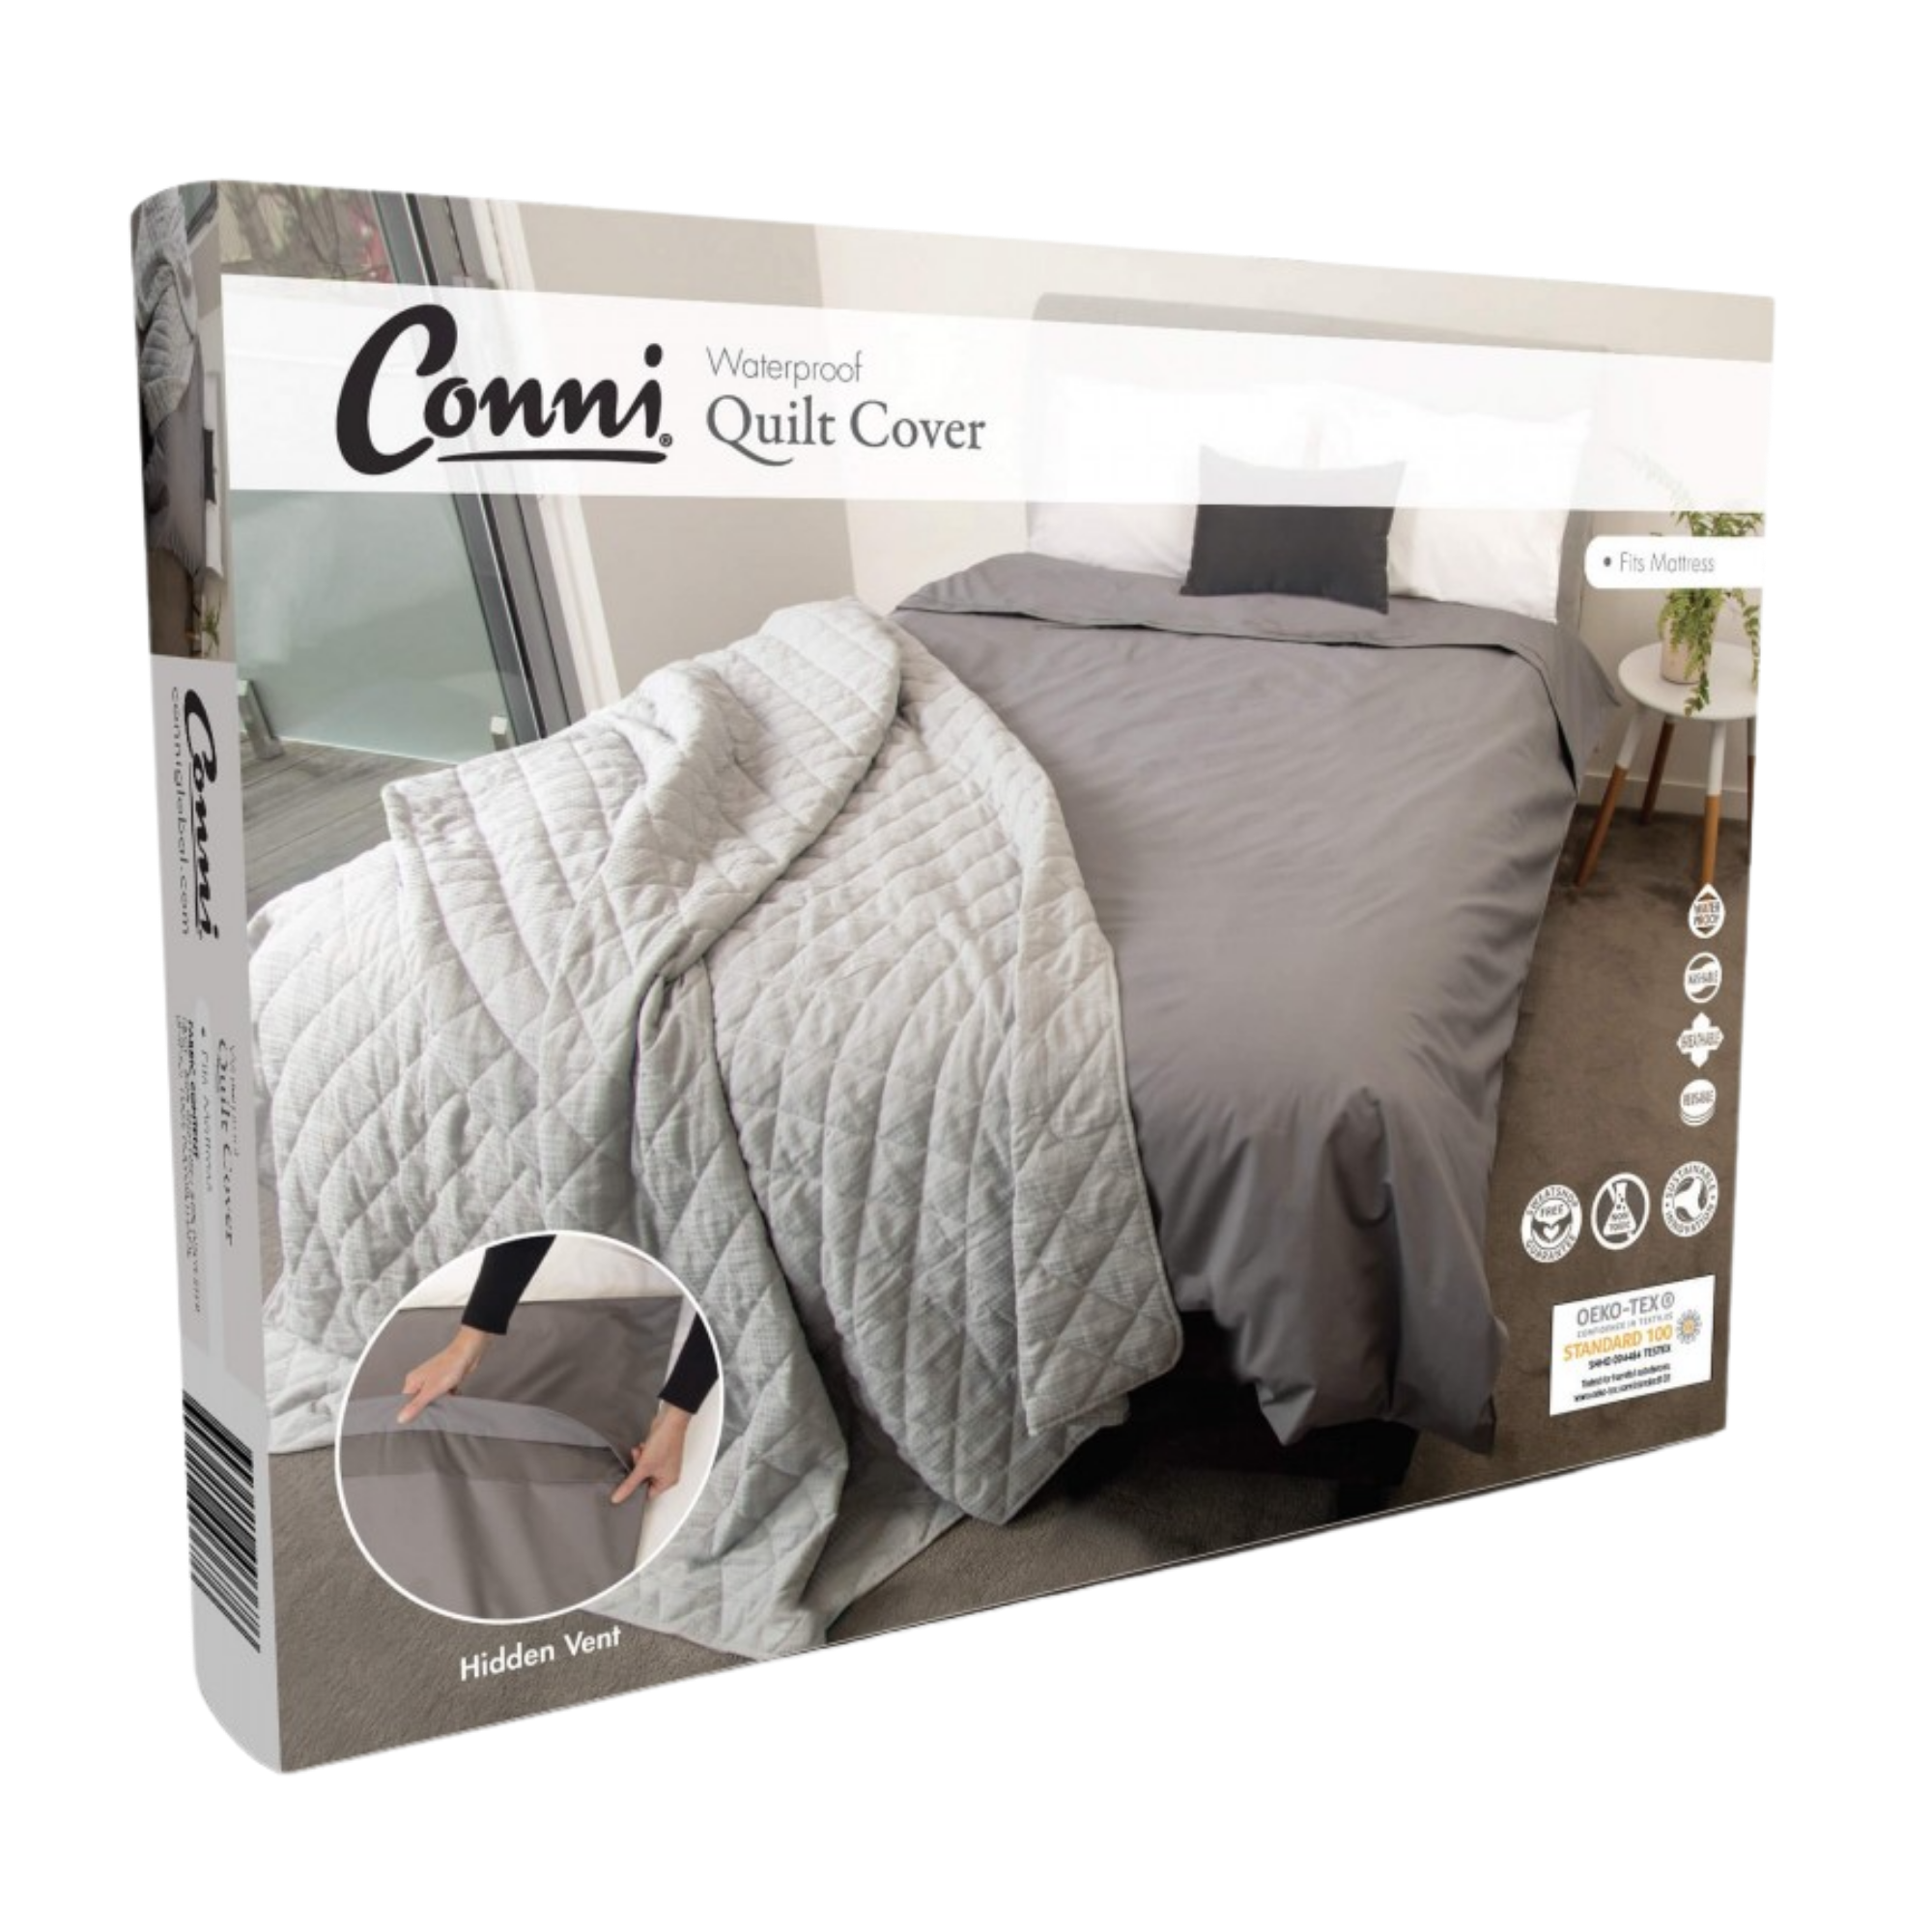 Conni Quilt Cover Double Charcoal Bedding